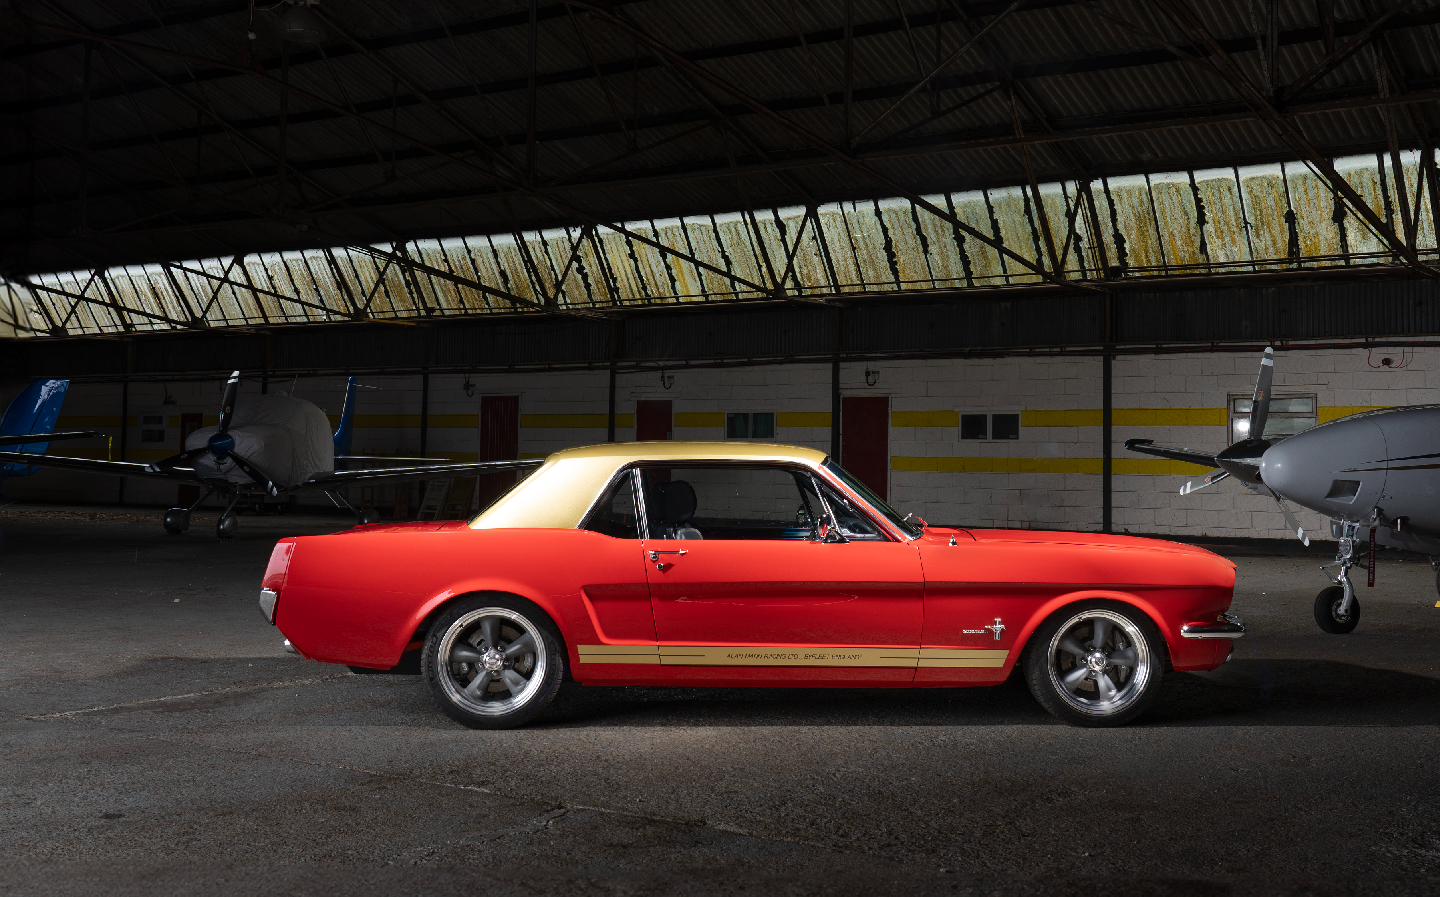 AMR Mustang ePower review: The 1960s restomod Pony car powered by